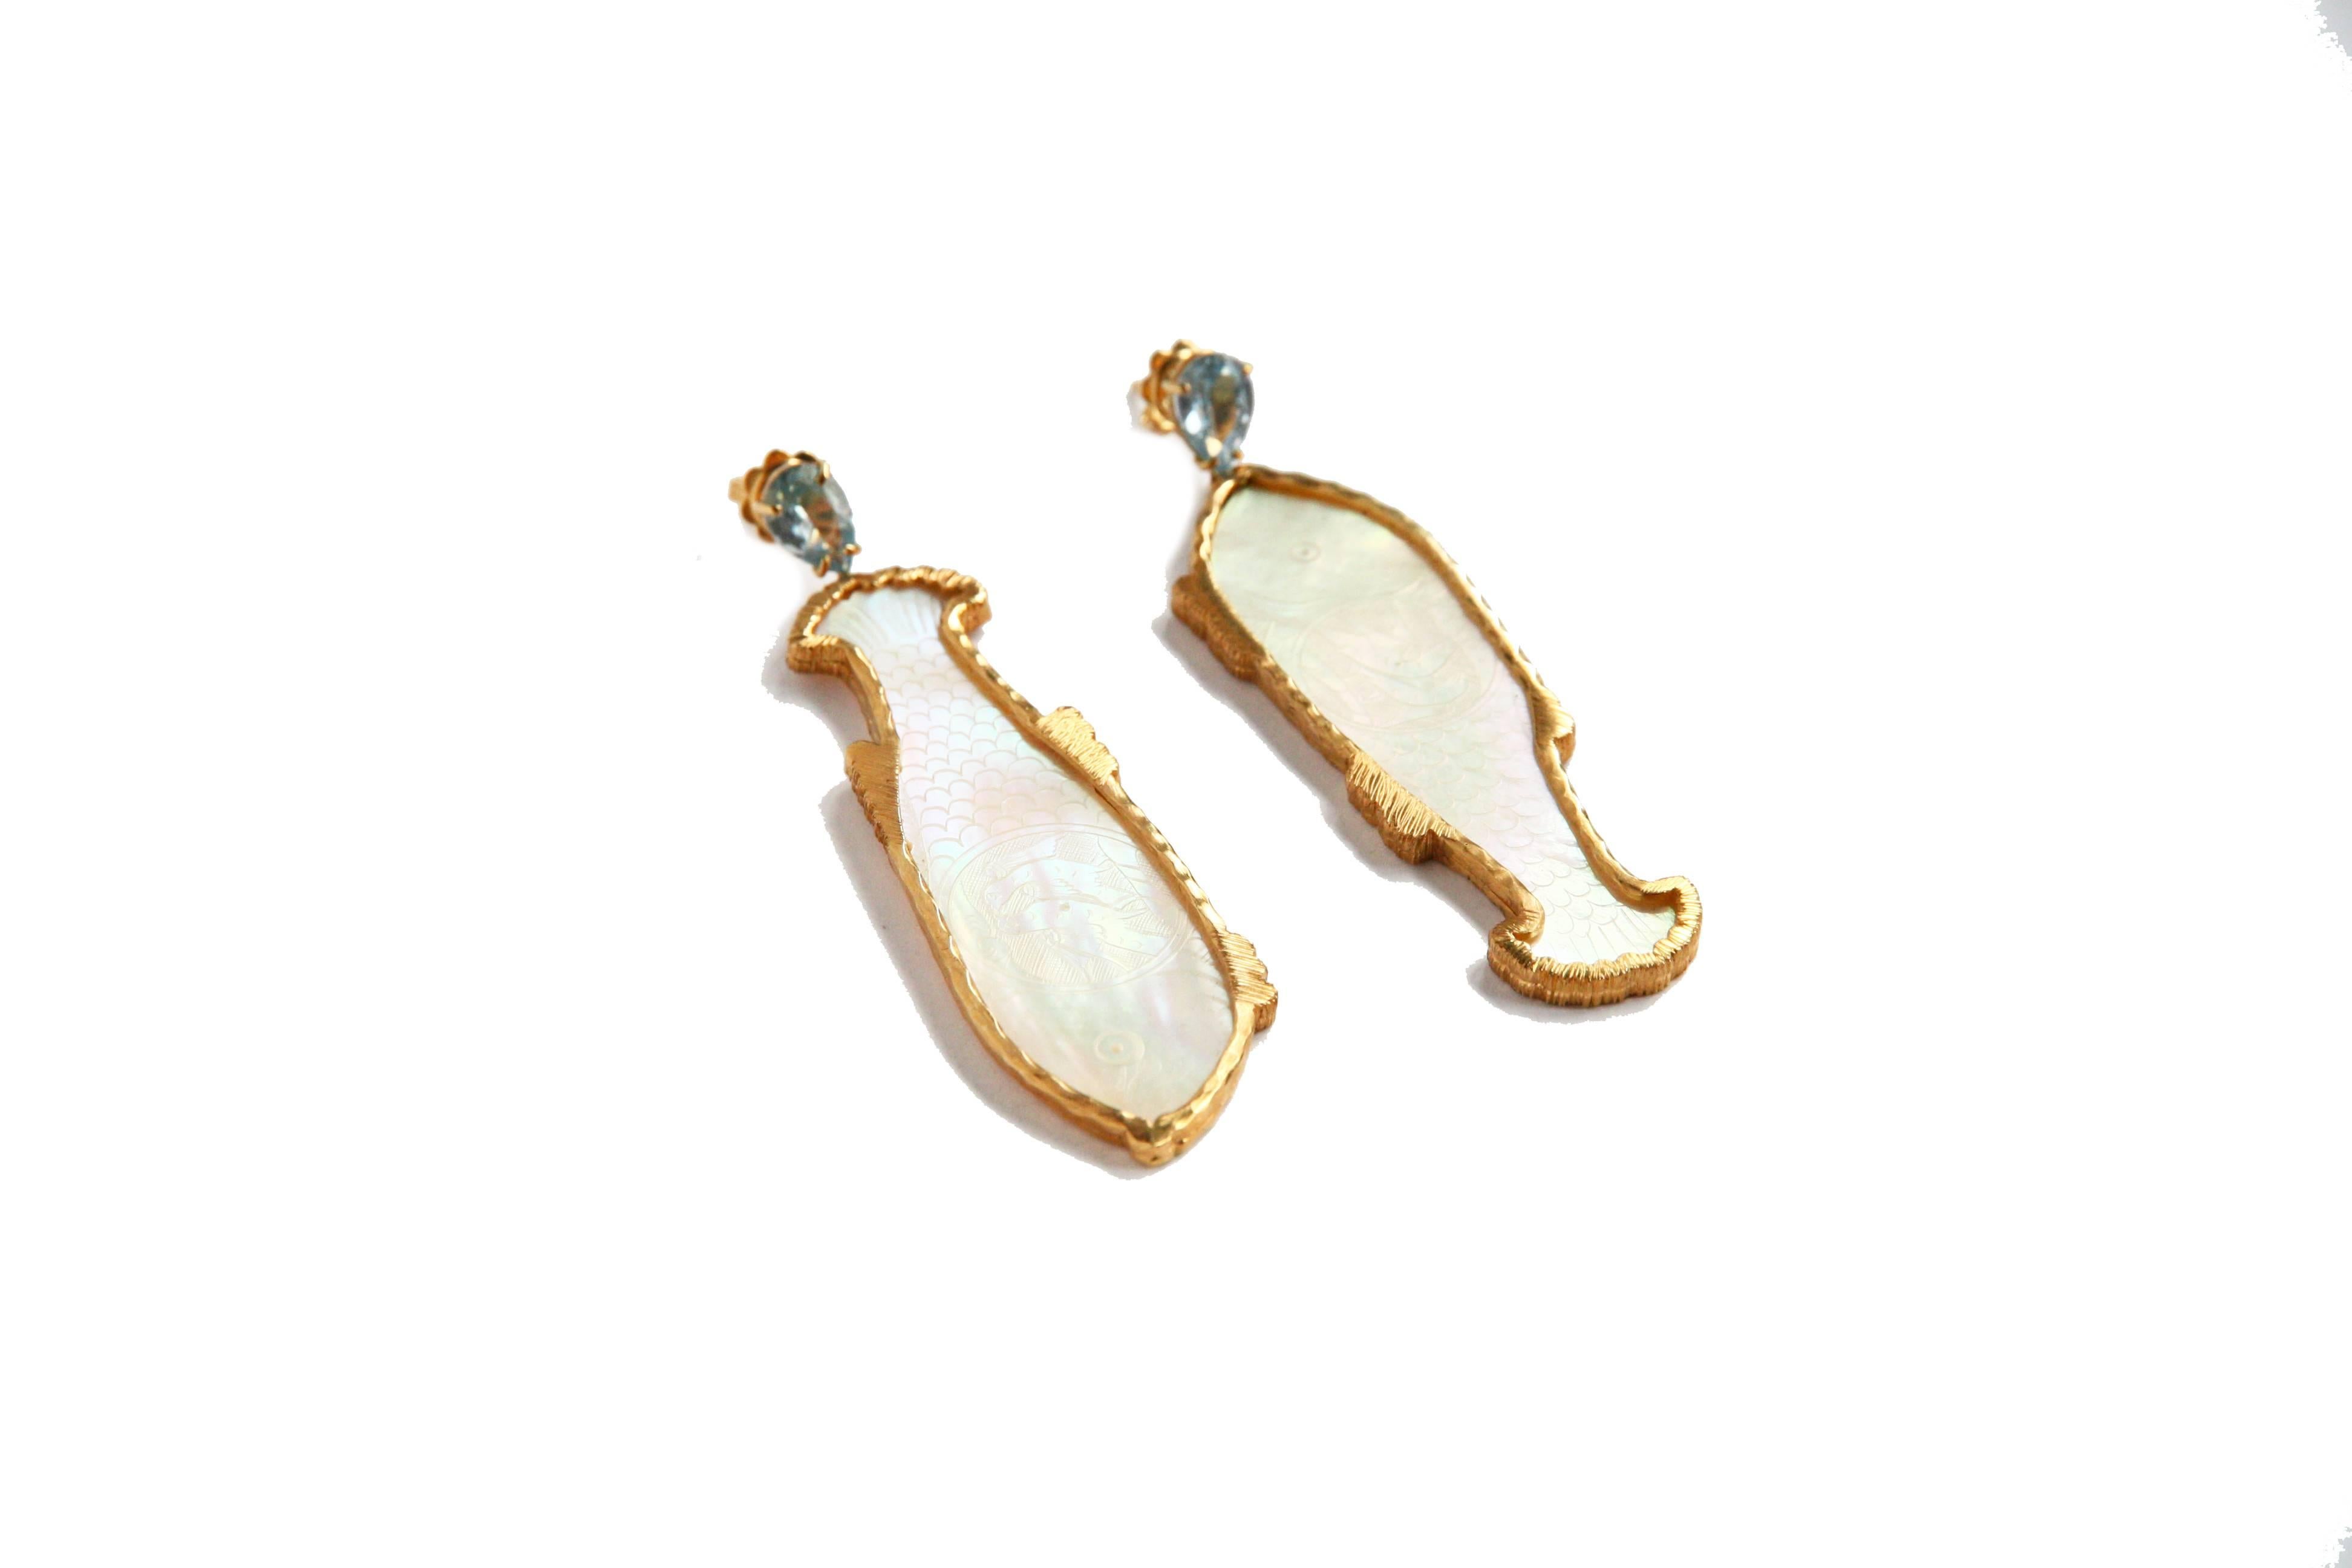 Earrings with antiques Macao casinò mother of pearls fiches fine engrave both side, faced sapphire drops, fine engrave 18k gold gr. 17,70, weight 9,5each.
Total length 7cm.
All Giulia Colussi jewelry is new and has never been previously owned or